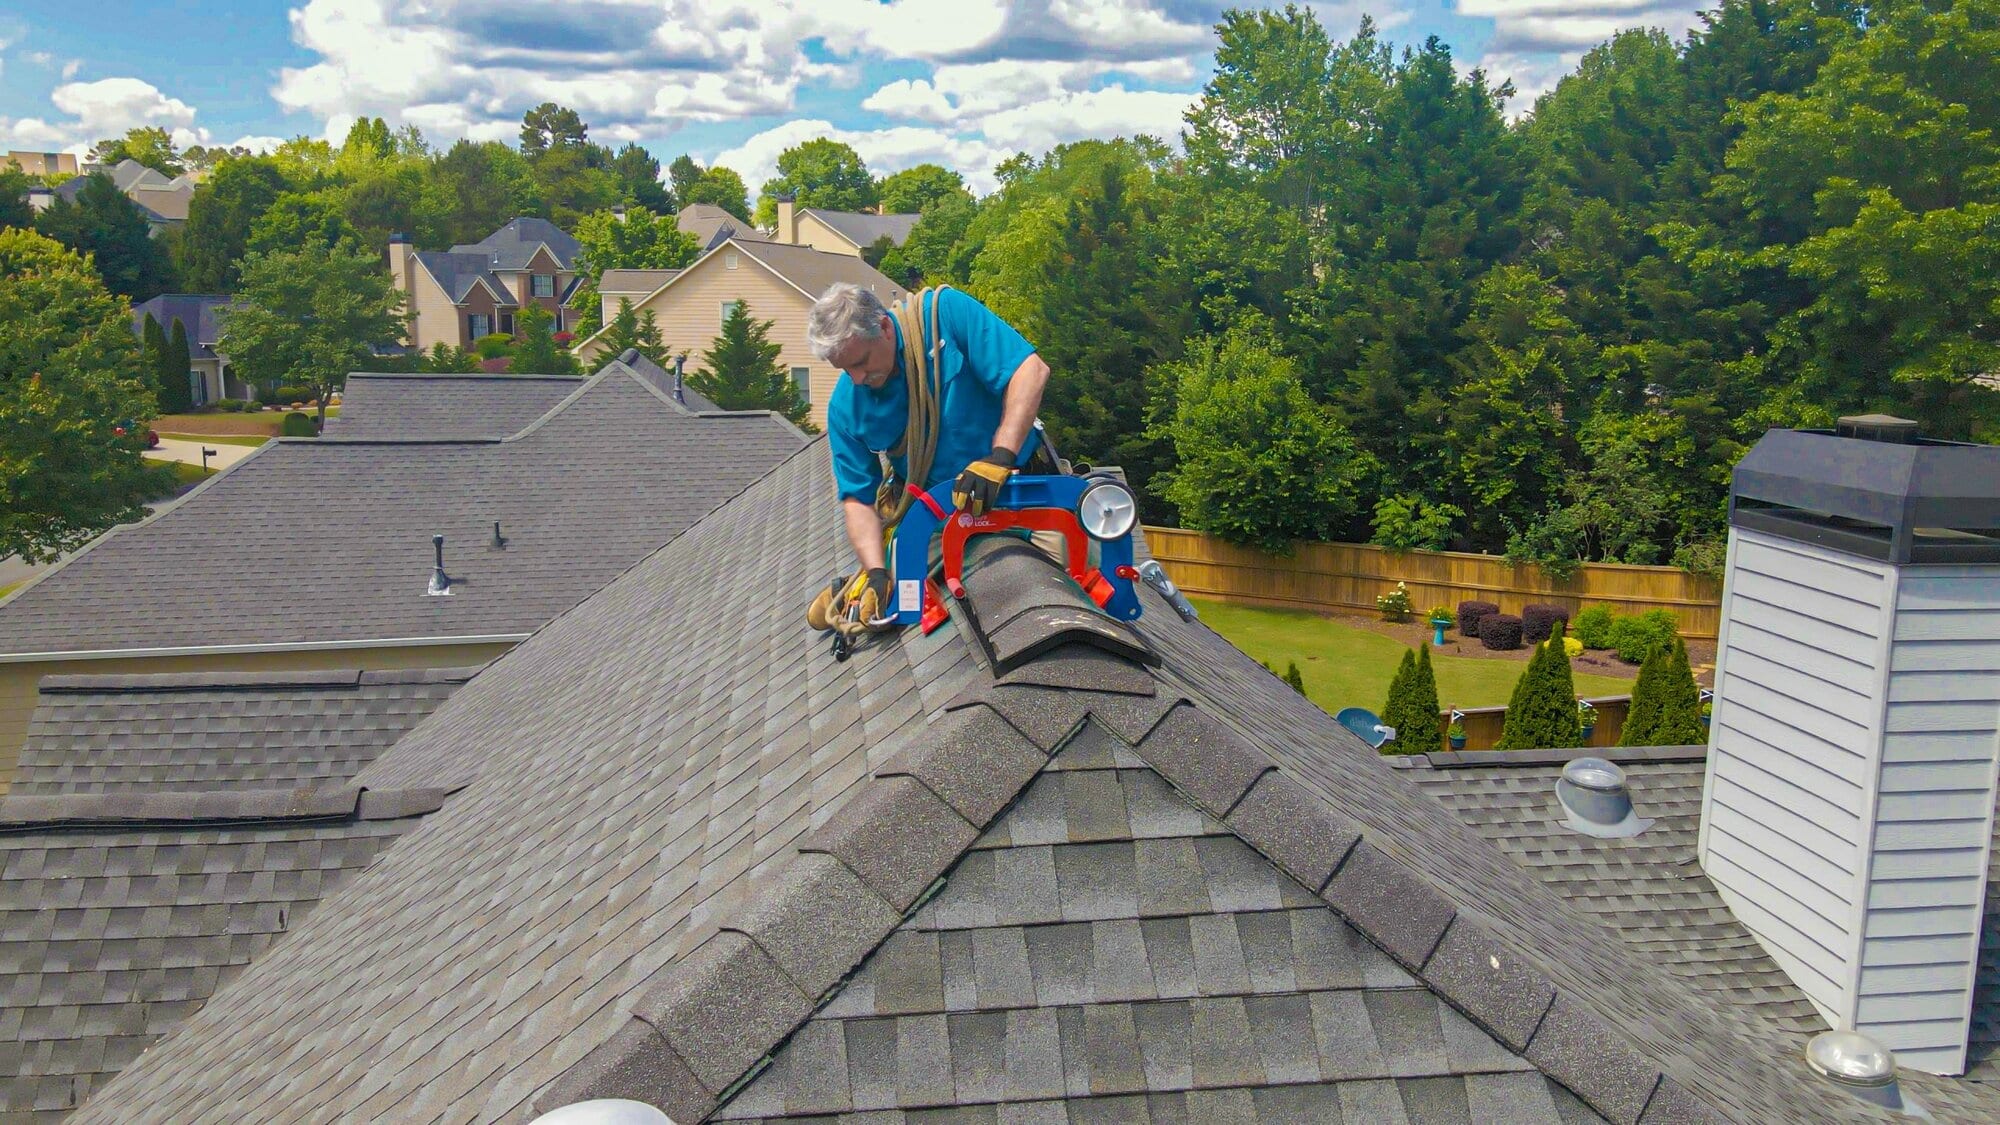 Roofing Company Near Me